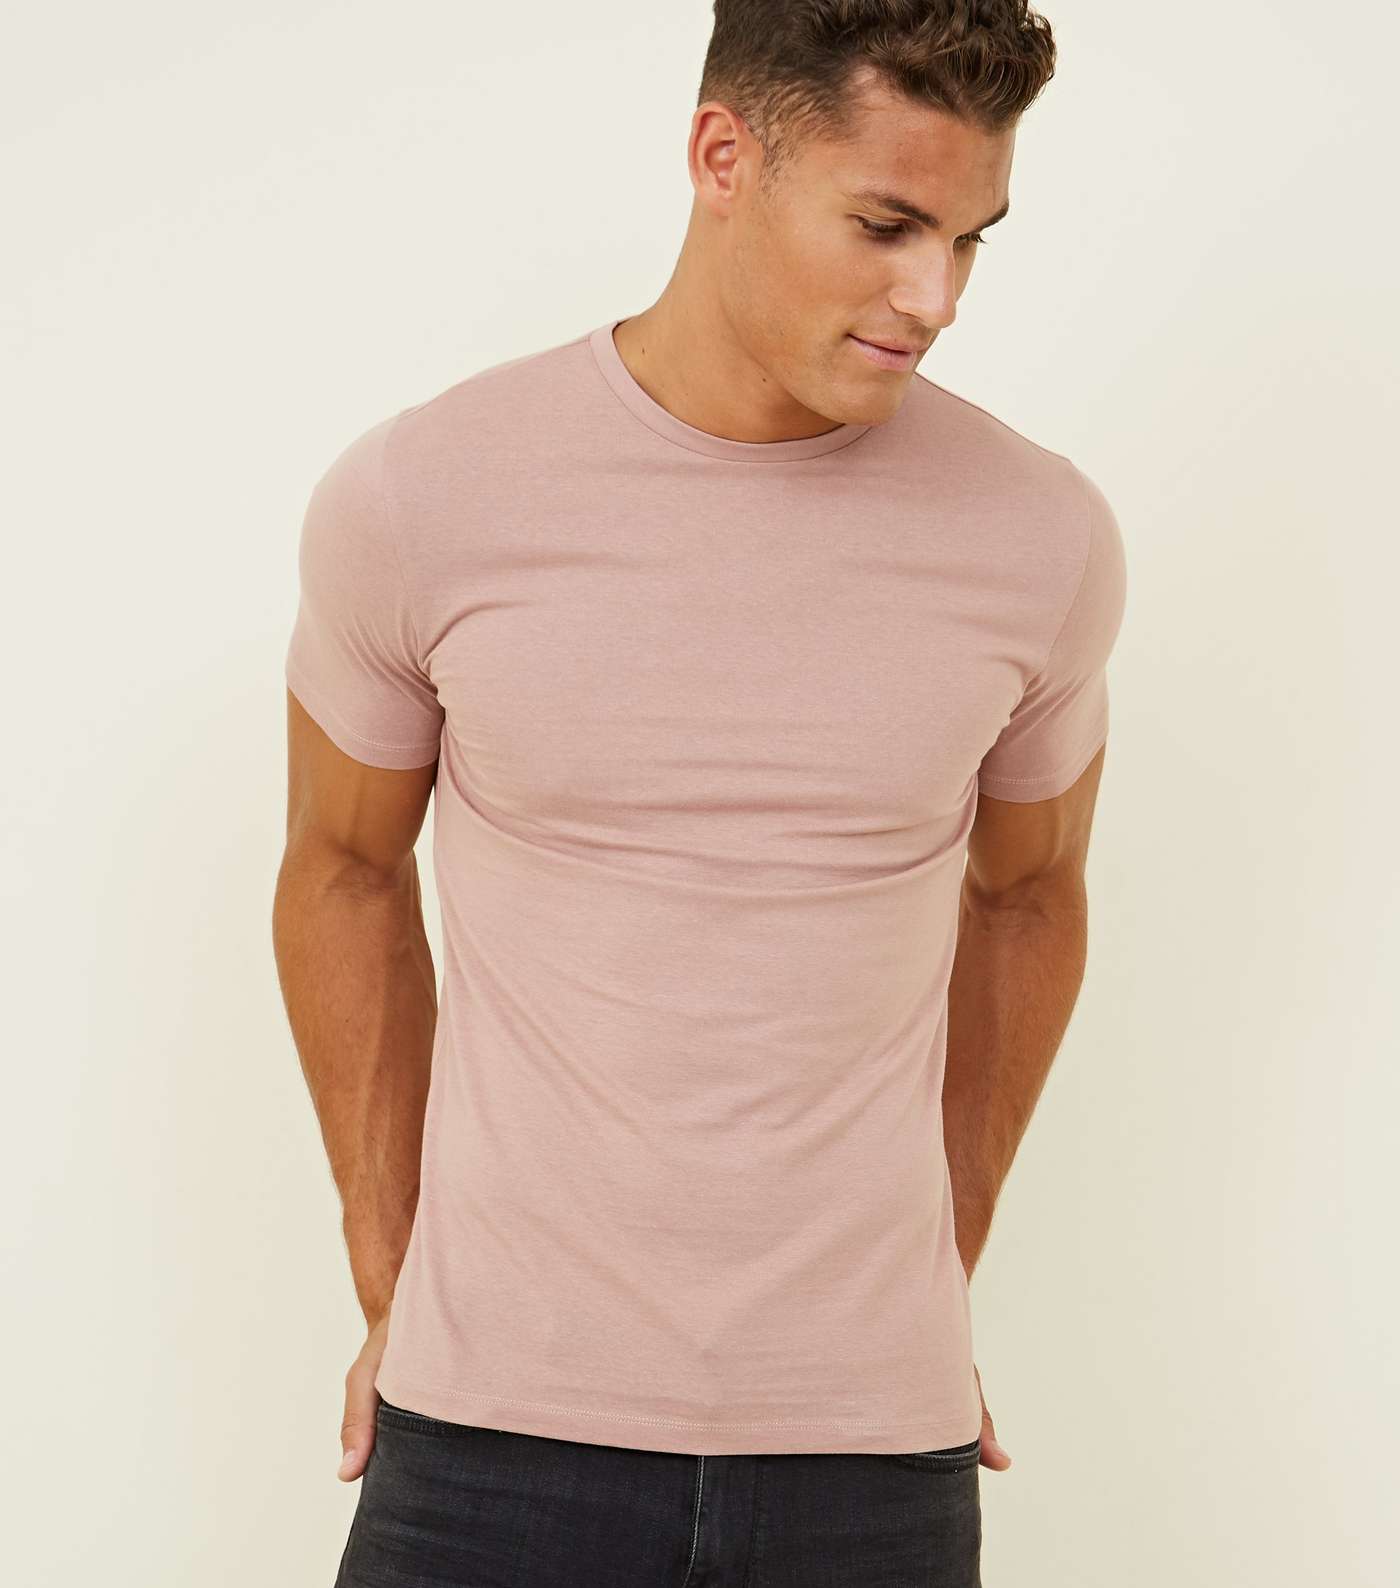 Mid Pink Short Sleeve Muscle Fit T-Shirt